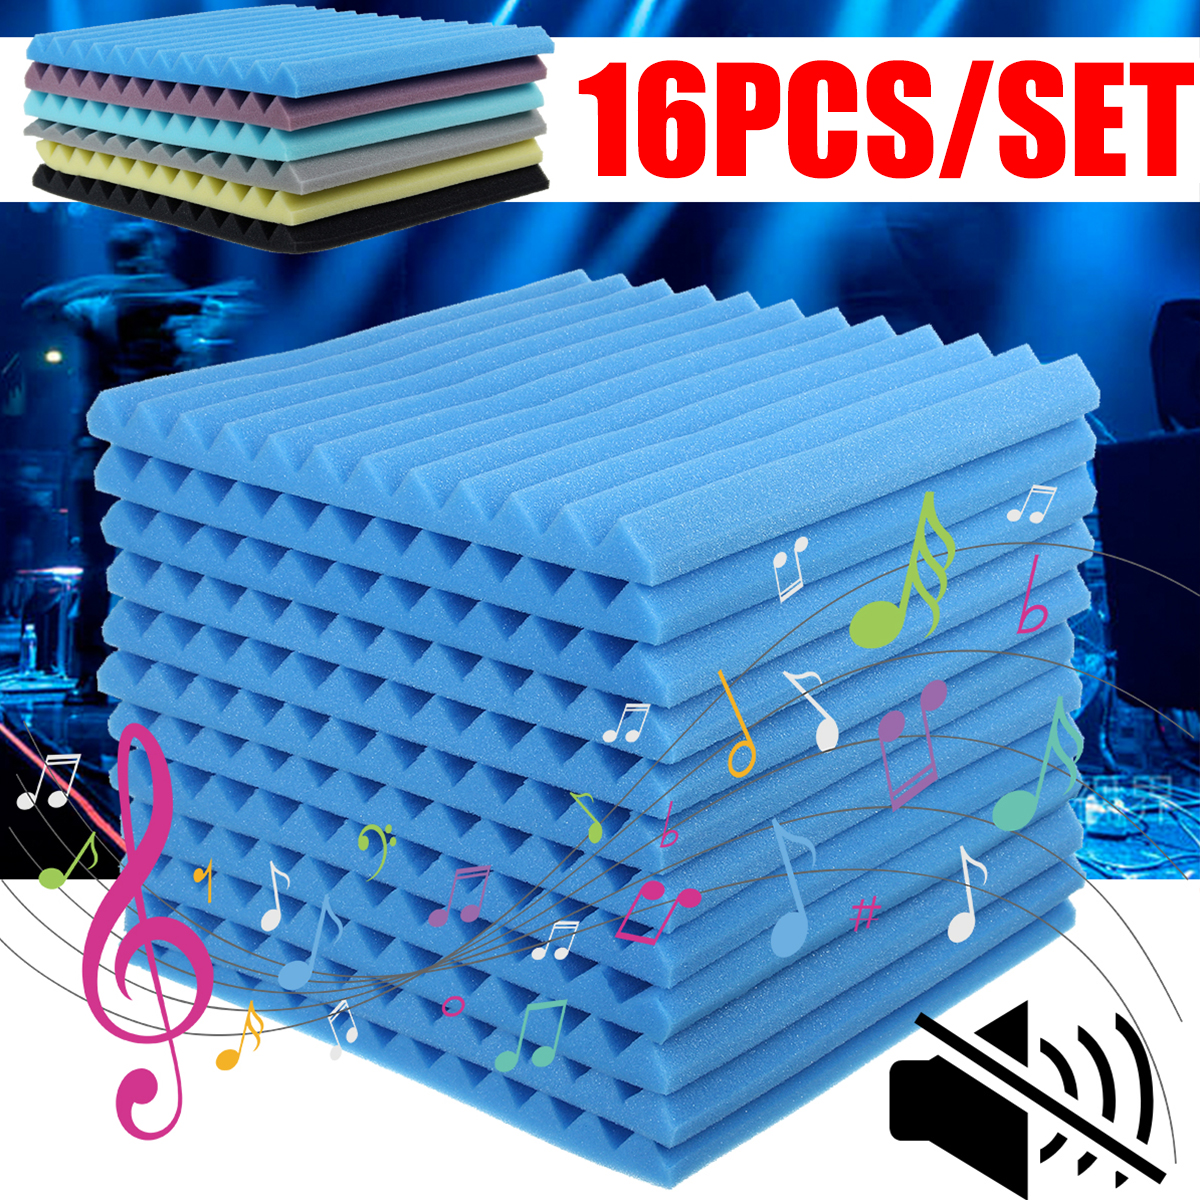 16 Pcs Soundproofing Wedges Acoustic Panels Tiles Insulation Closed Cell Foams